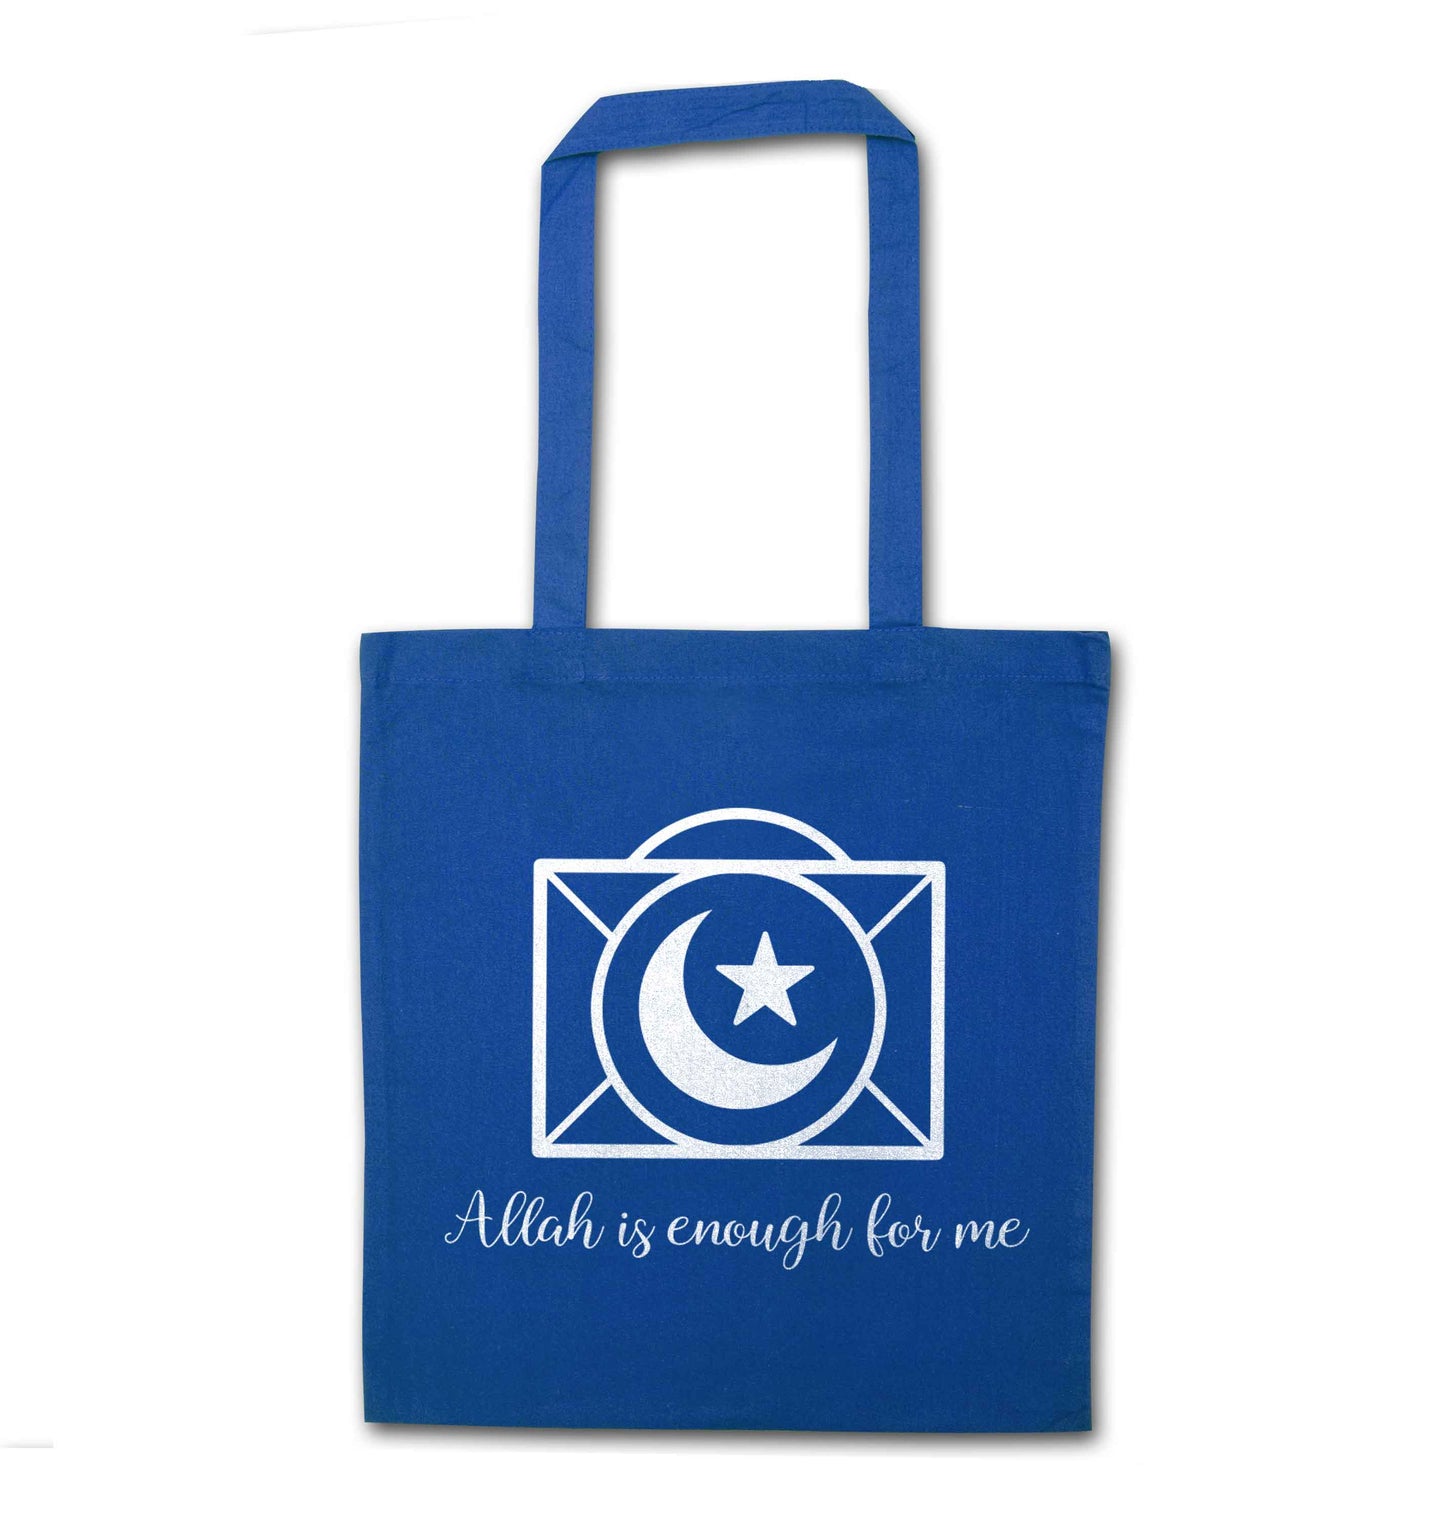 Allah is enough for me blue tote bag